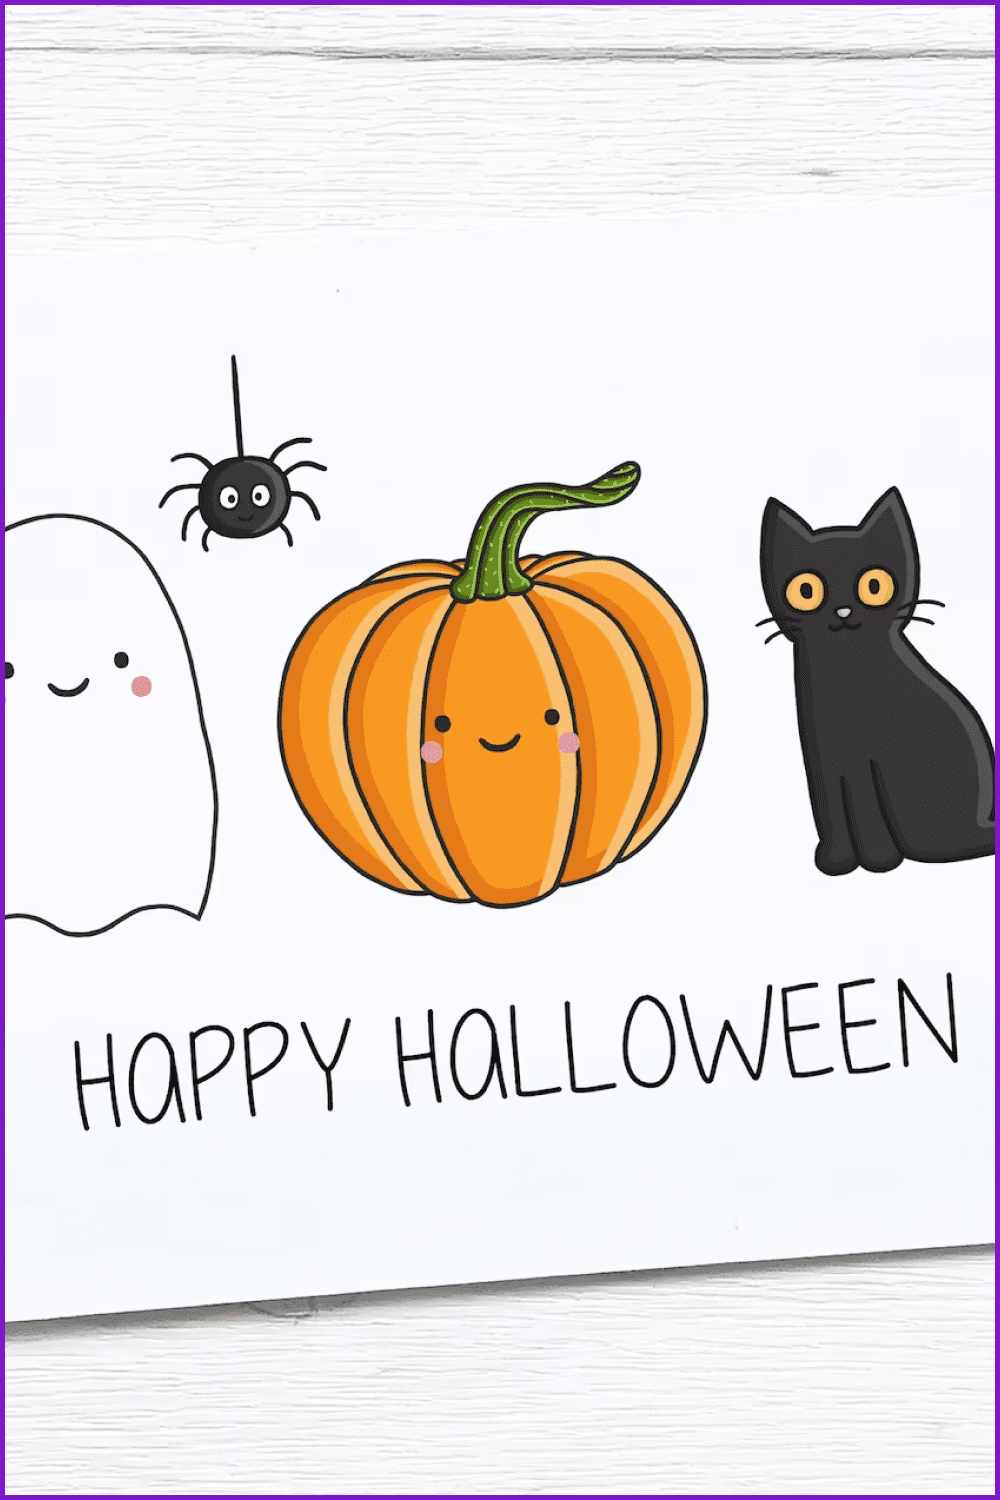 White greeting card with cute ghost, pumpkin, spider and cat.